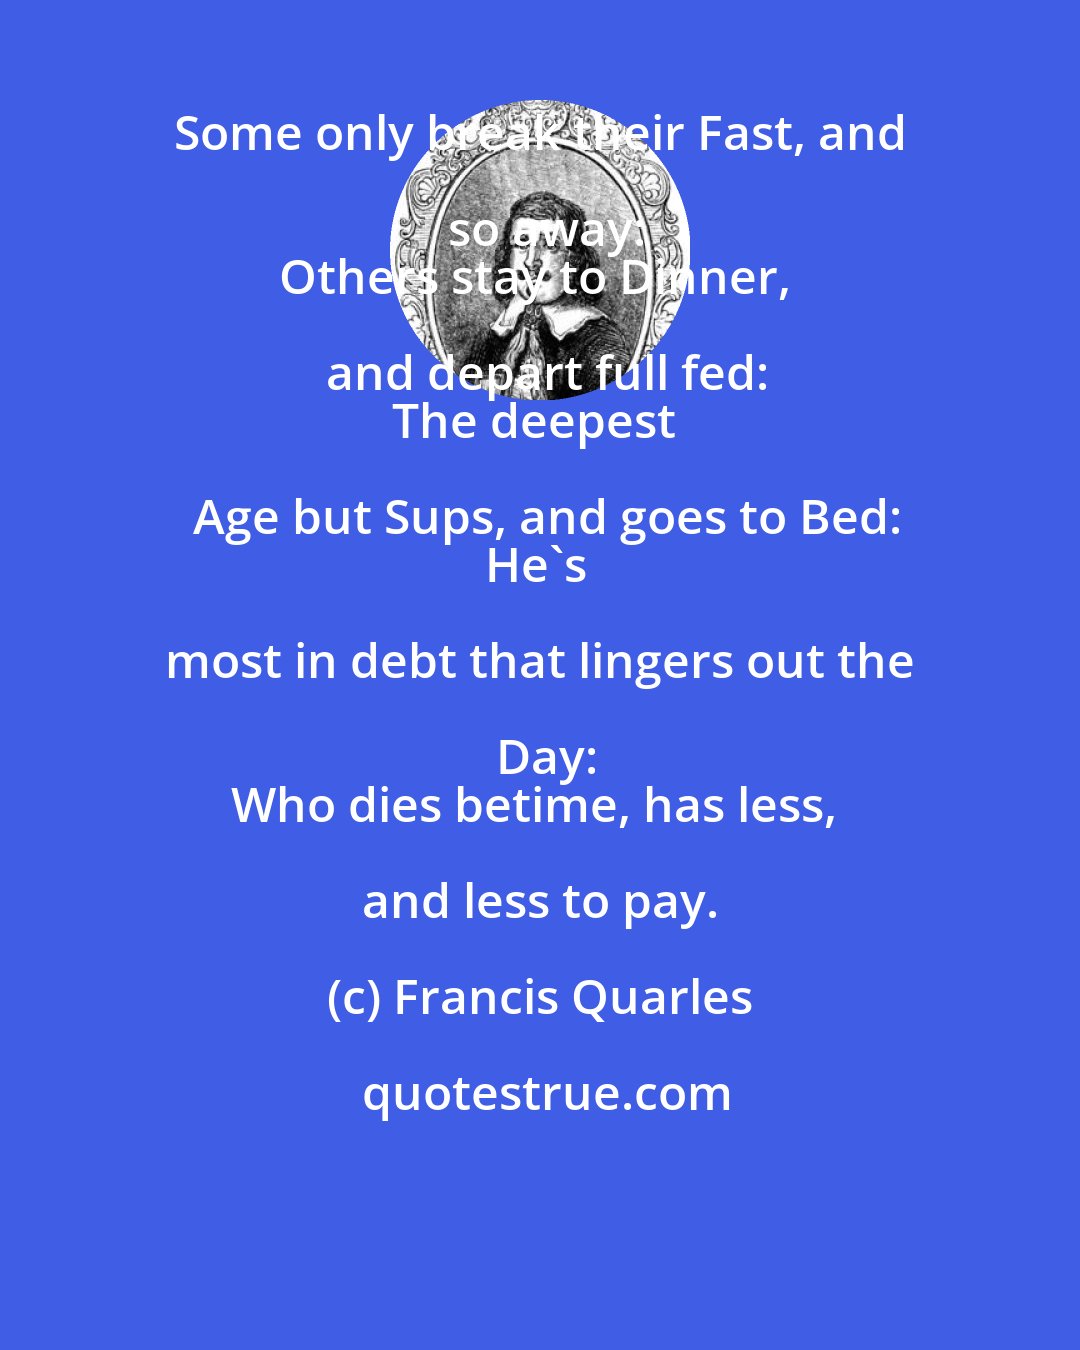 Francis Quarles: Some only break their Fast, and so away:
Others stay to Dinner, and depart full fed:
The deepest Age but Sups, and goes to Bed:
He's most in debt that lingers out the Day:
Who dies betime, has less, and less to pay.